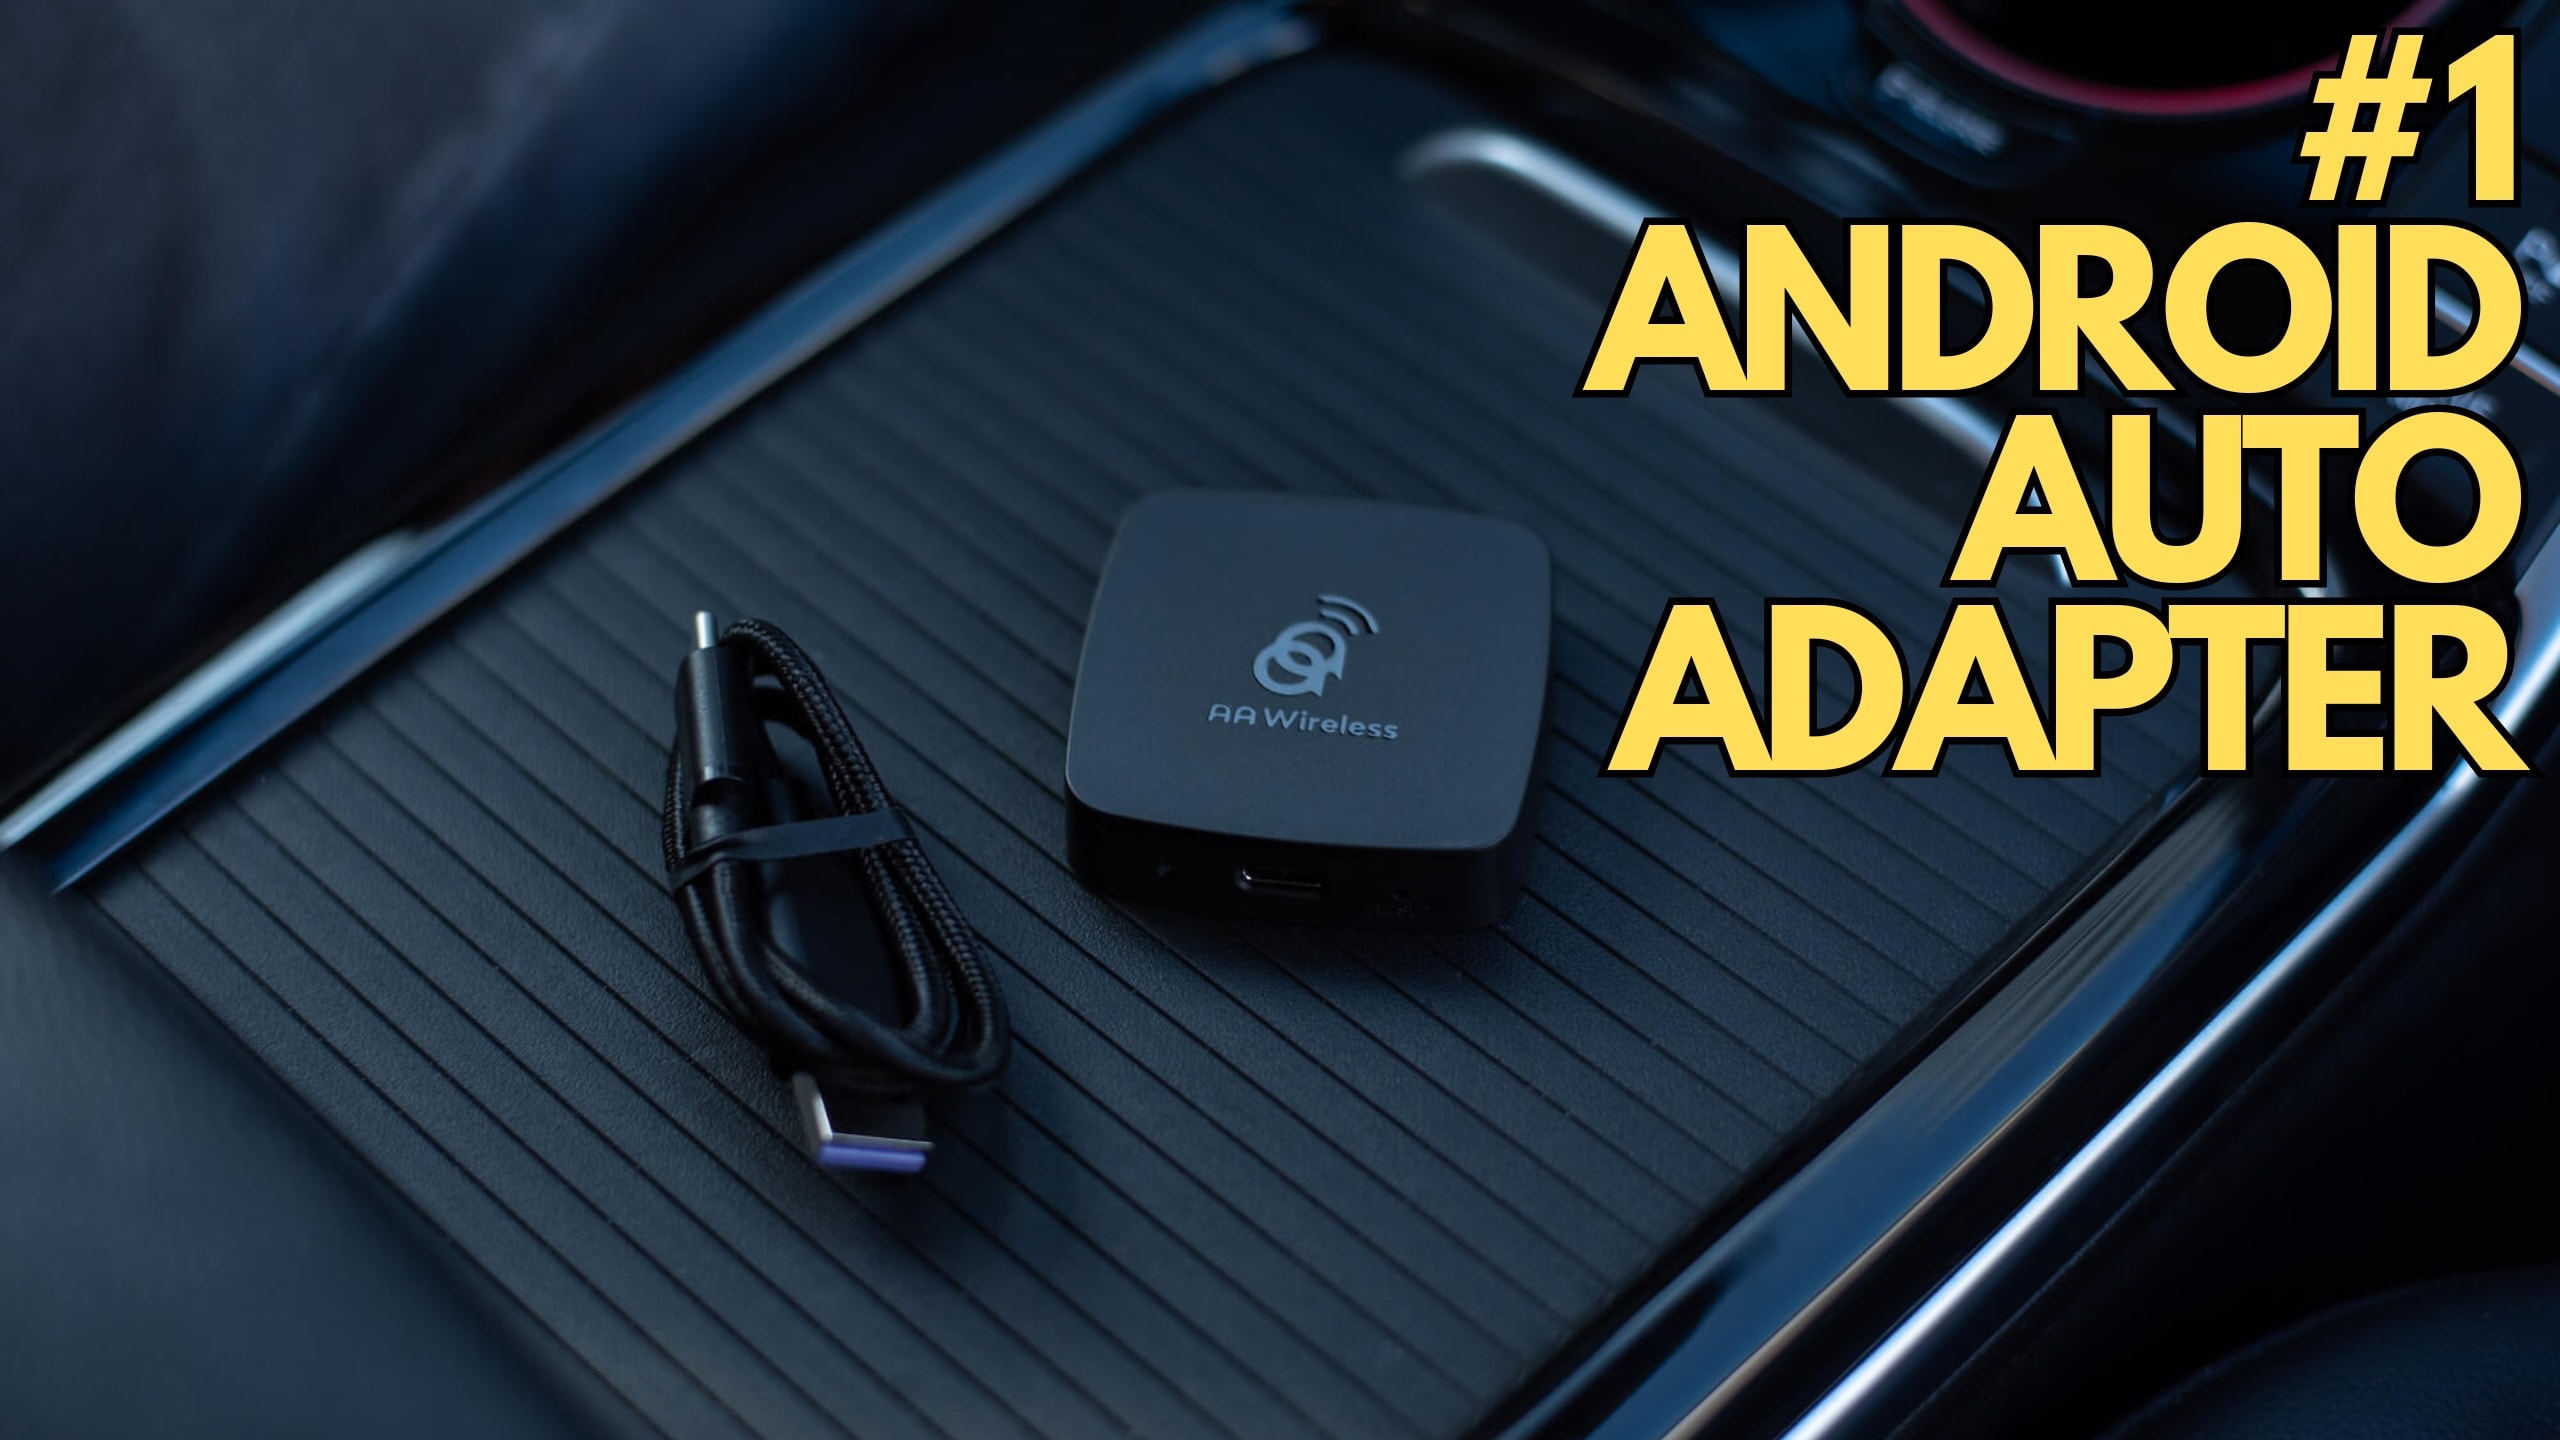 Why the World's Number One Wireless Android Auto Adapter Went Dark